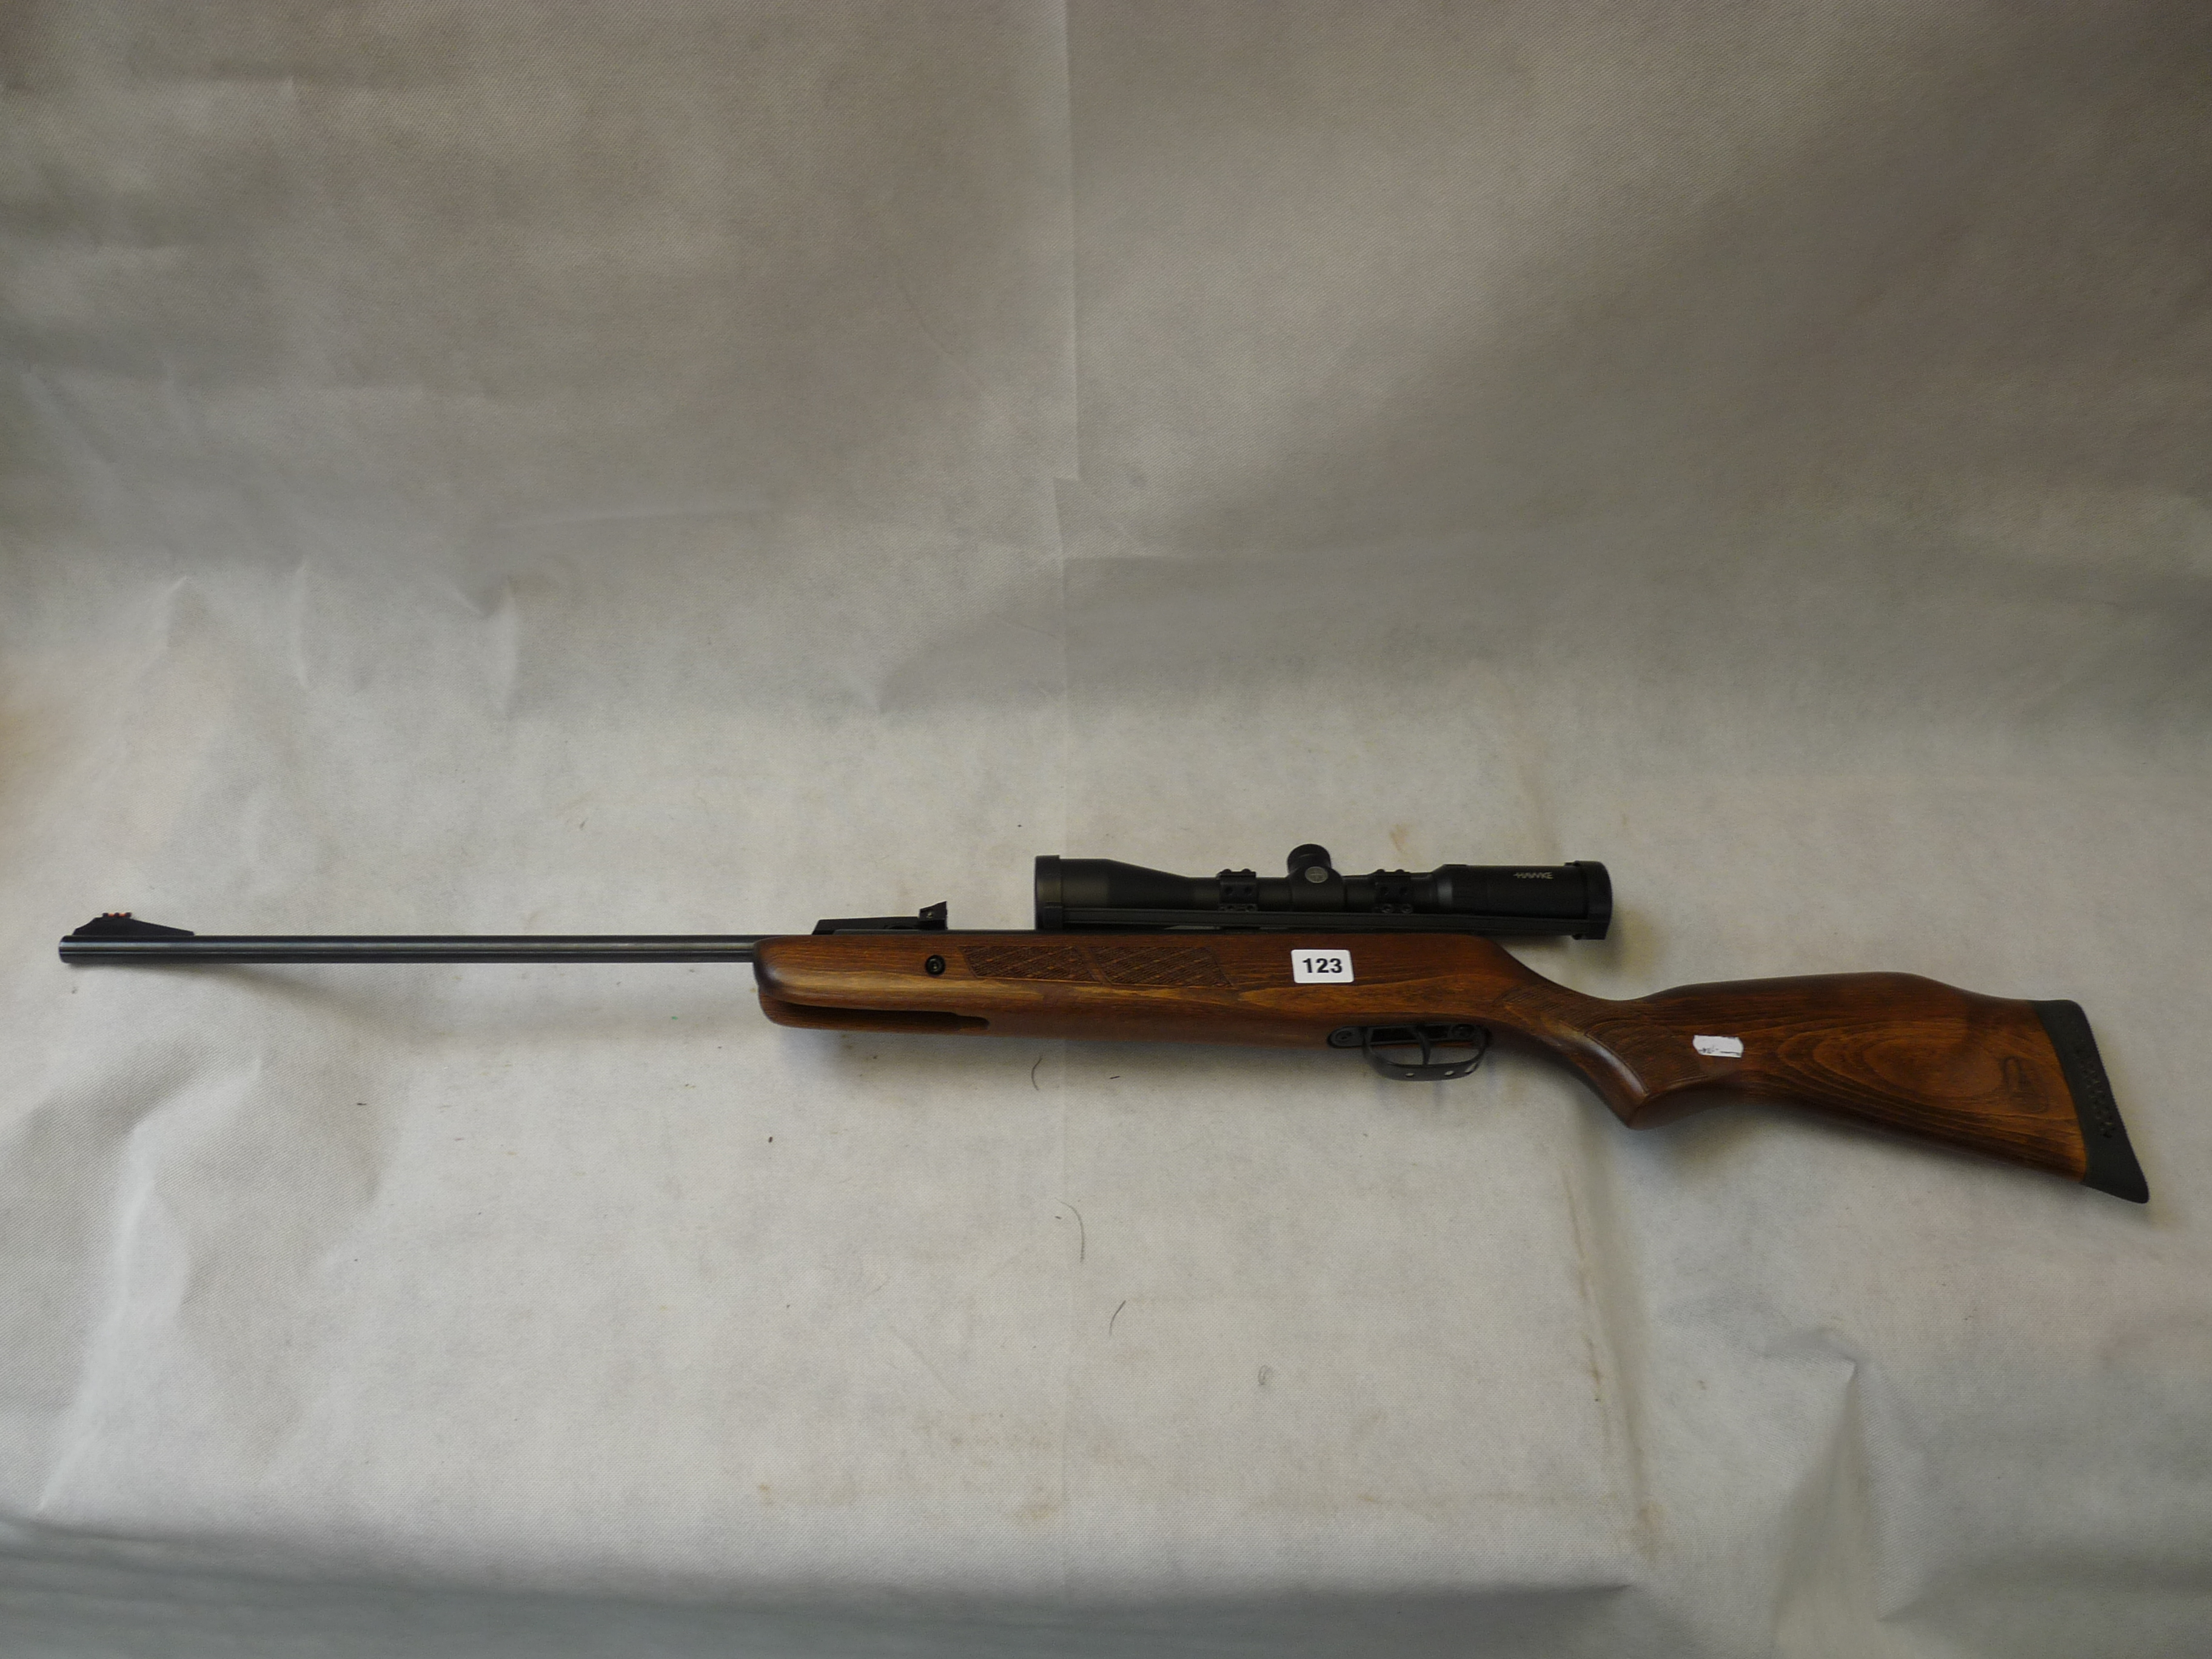 BSA Supersport .22 Spring Loaded Air Rifle with Hawke Scope